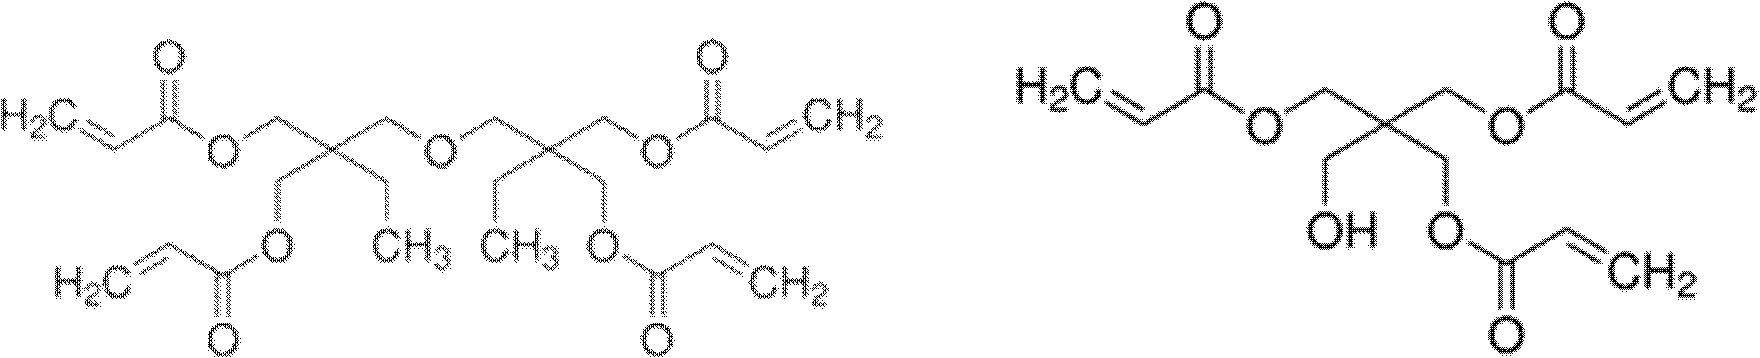 Preparation method of chitosan modified polylactic acid material by gamma-ray irradiation